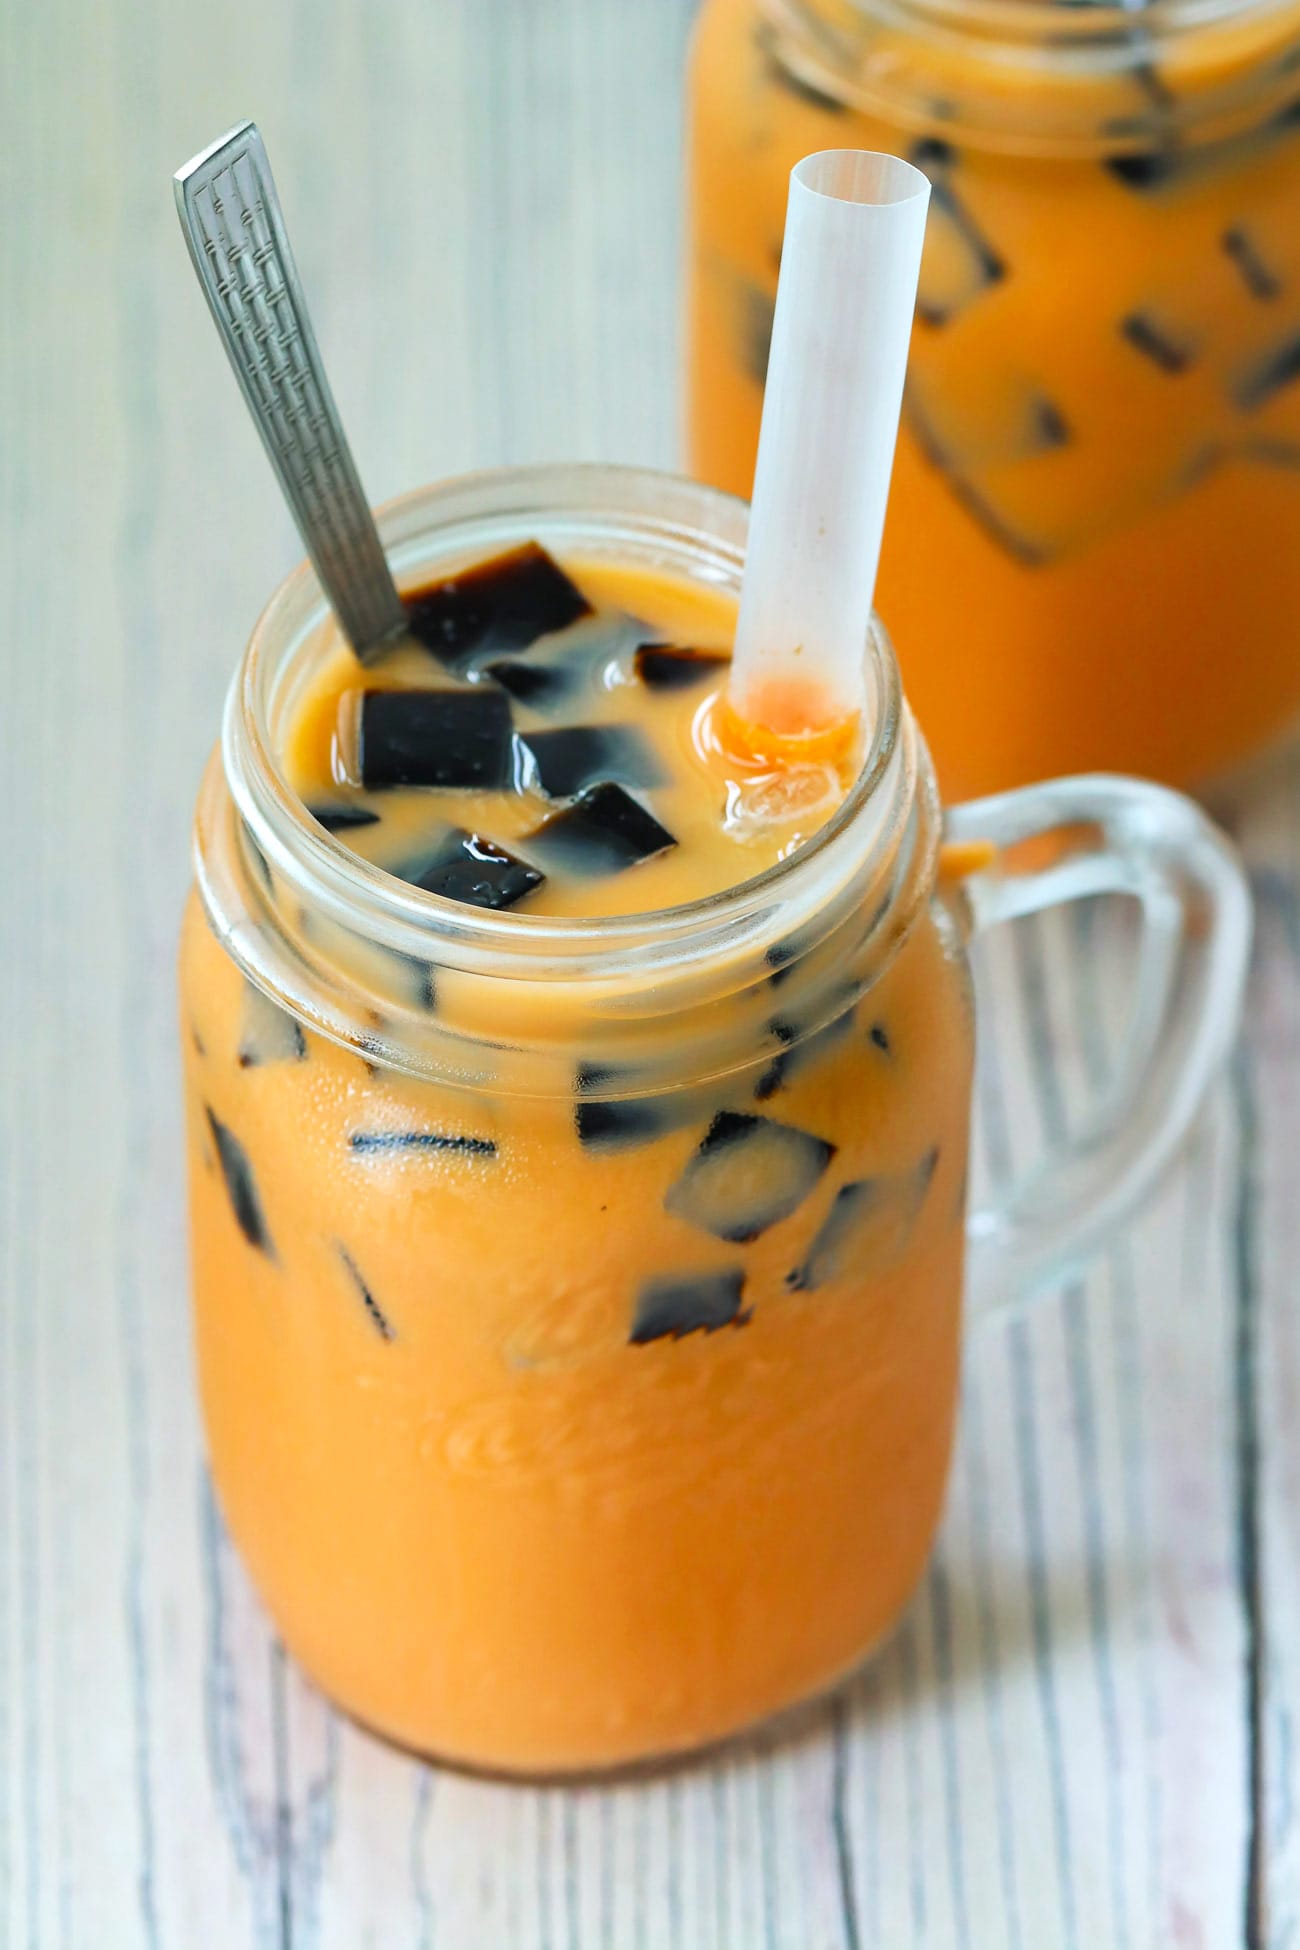 Thai Iced Milk Tea With Grass Jelly - That Spicy Chick